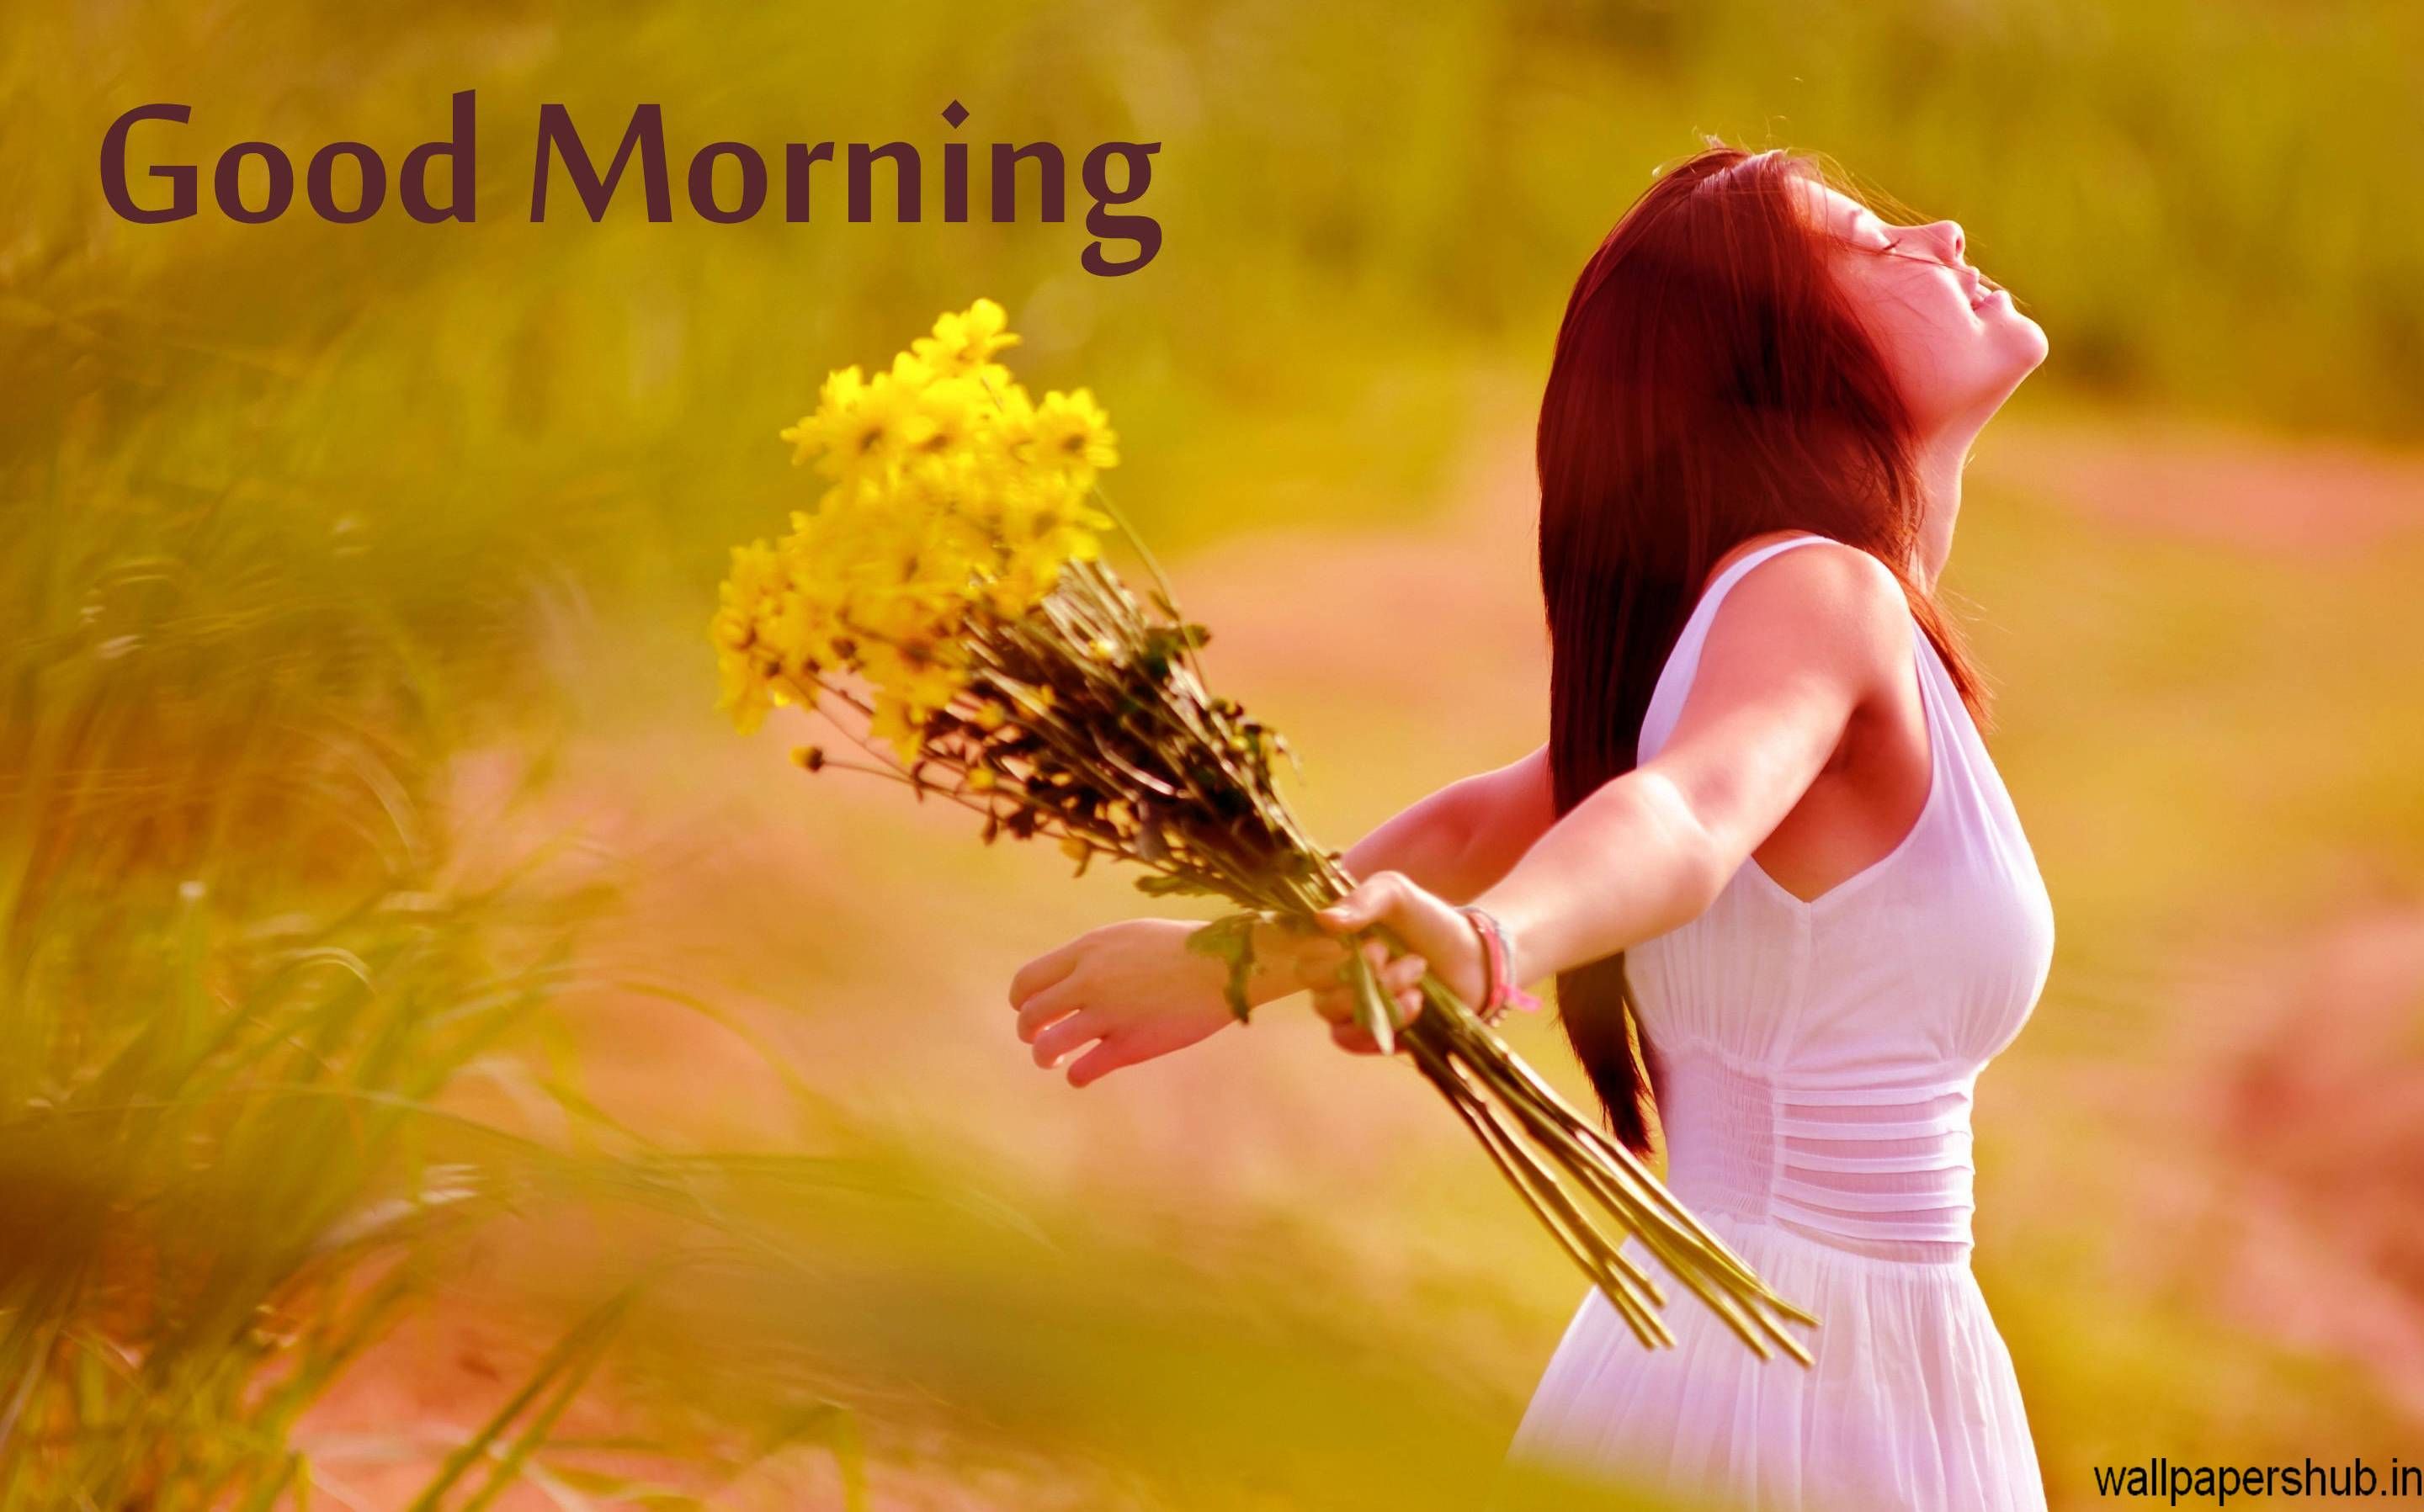 good morning wallpaper,people in nature,nature,yellow,beauty,morning